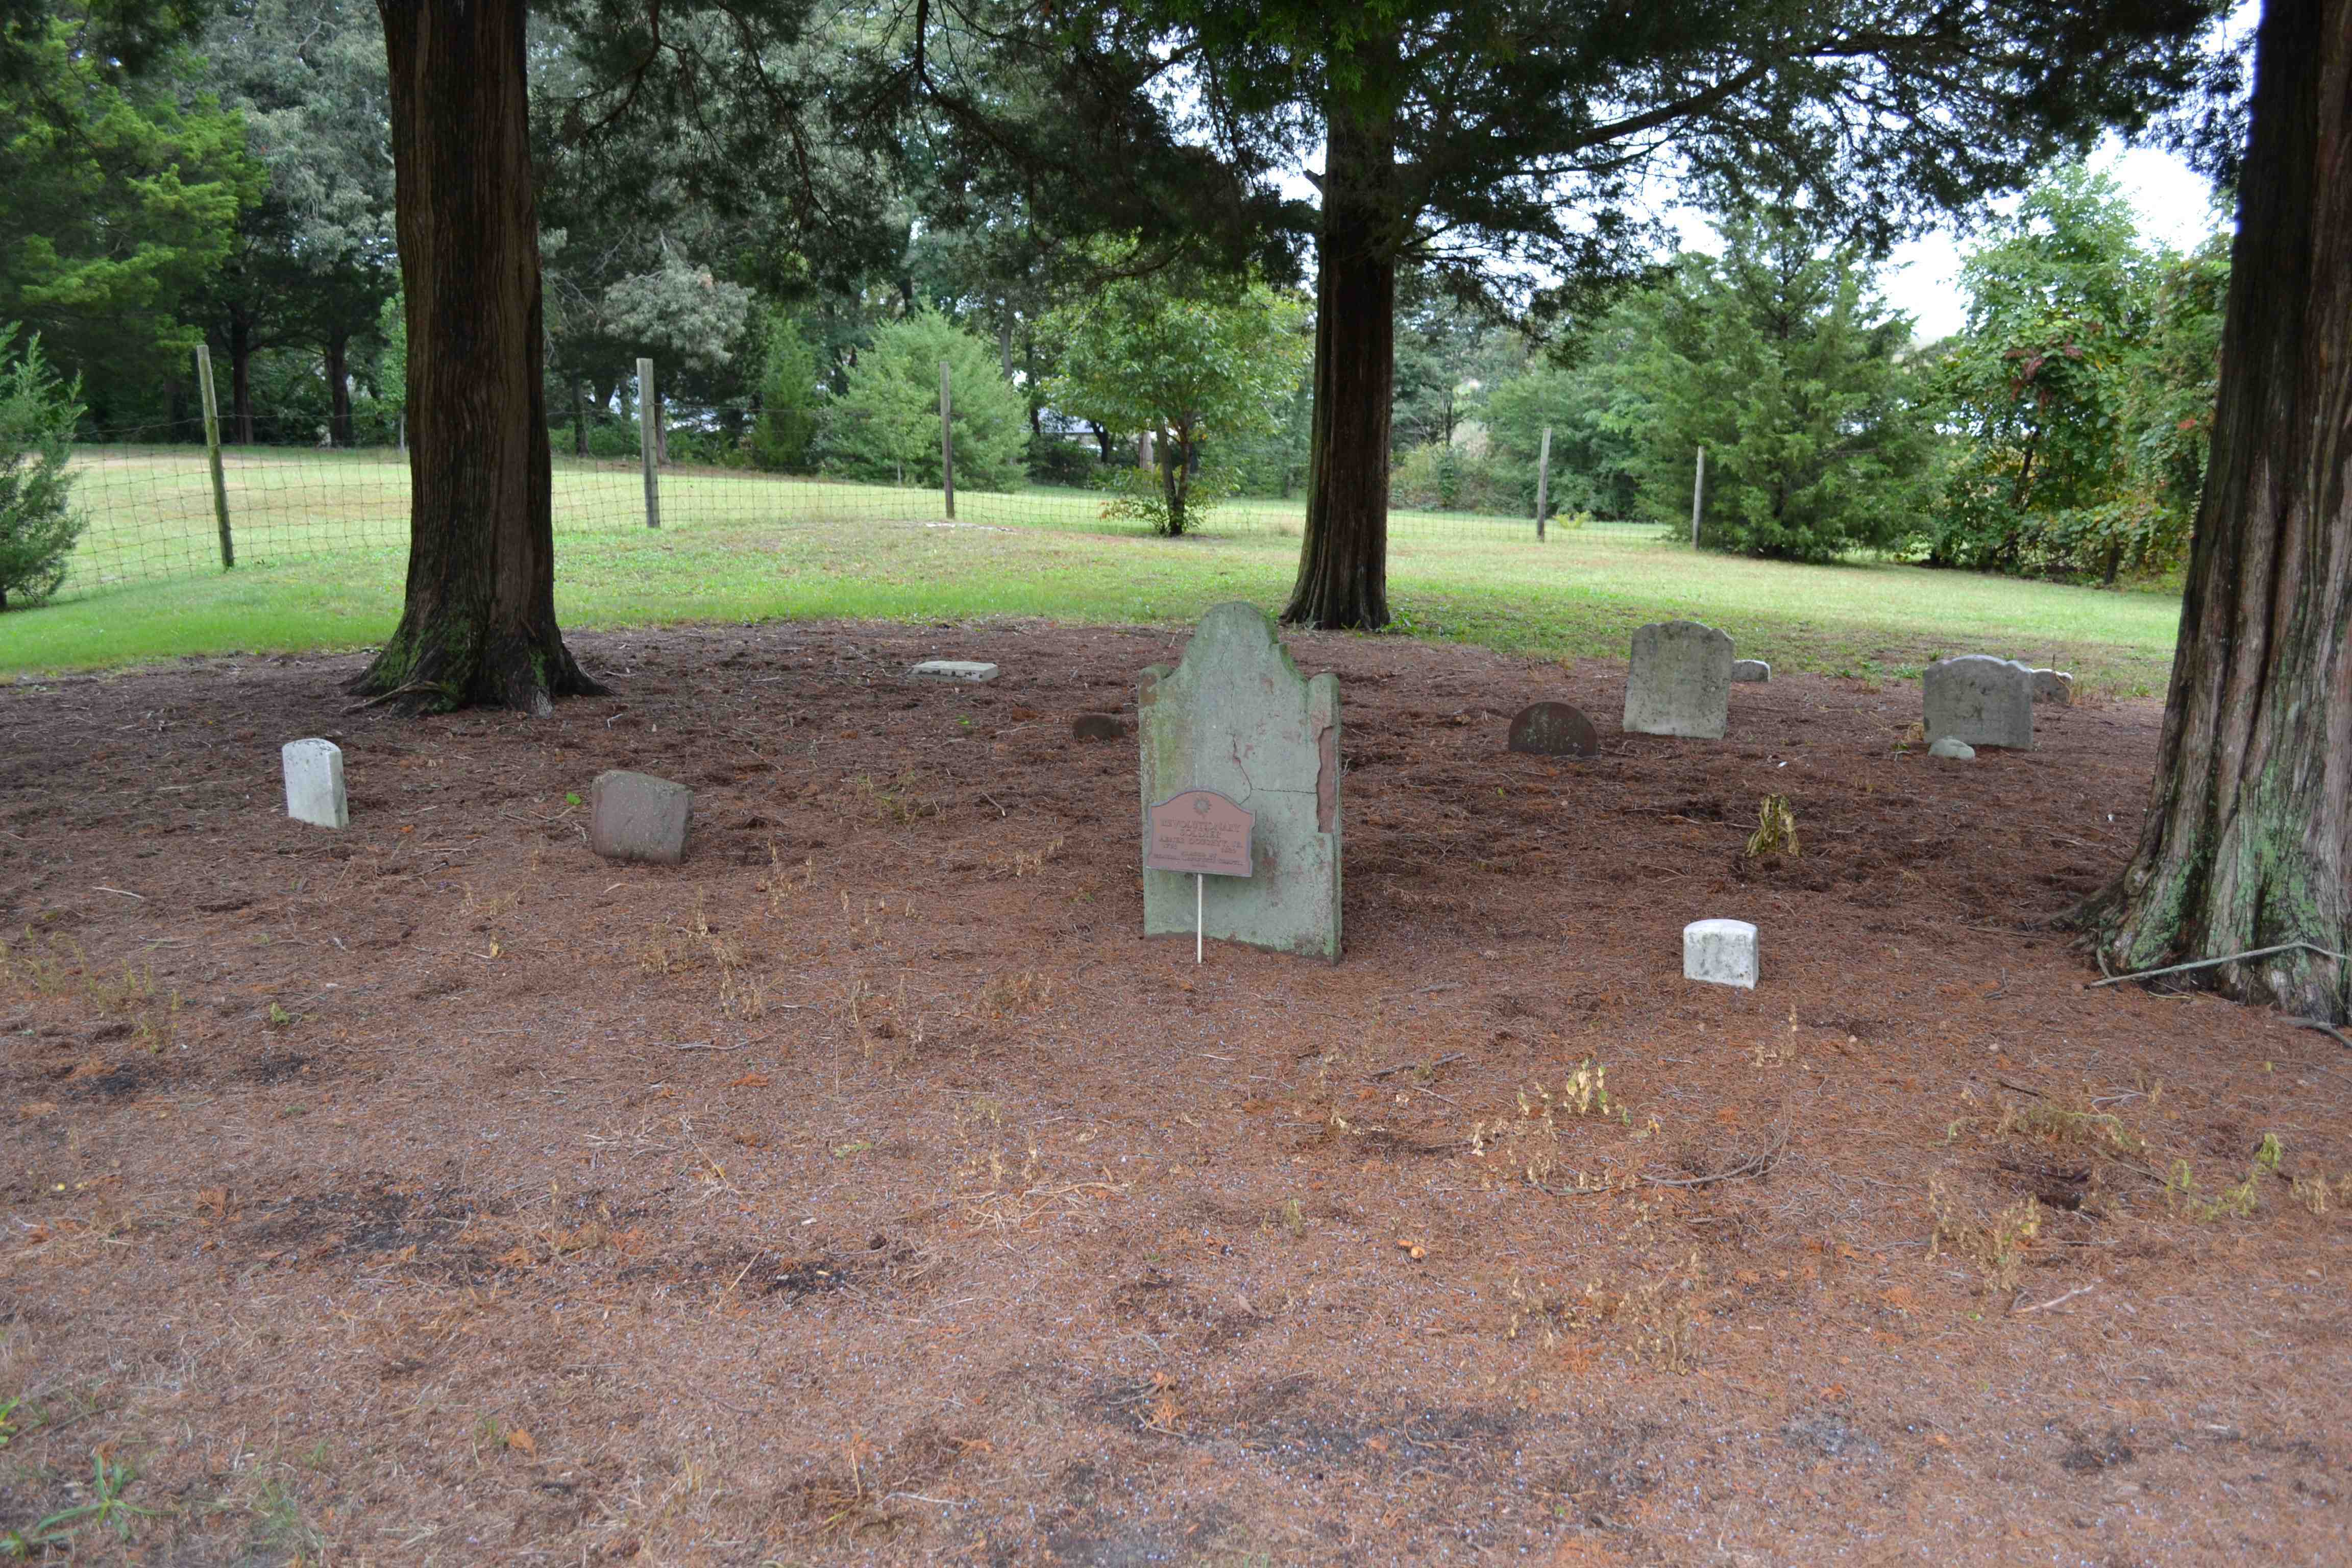 [Doughty Burial Ground Image]